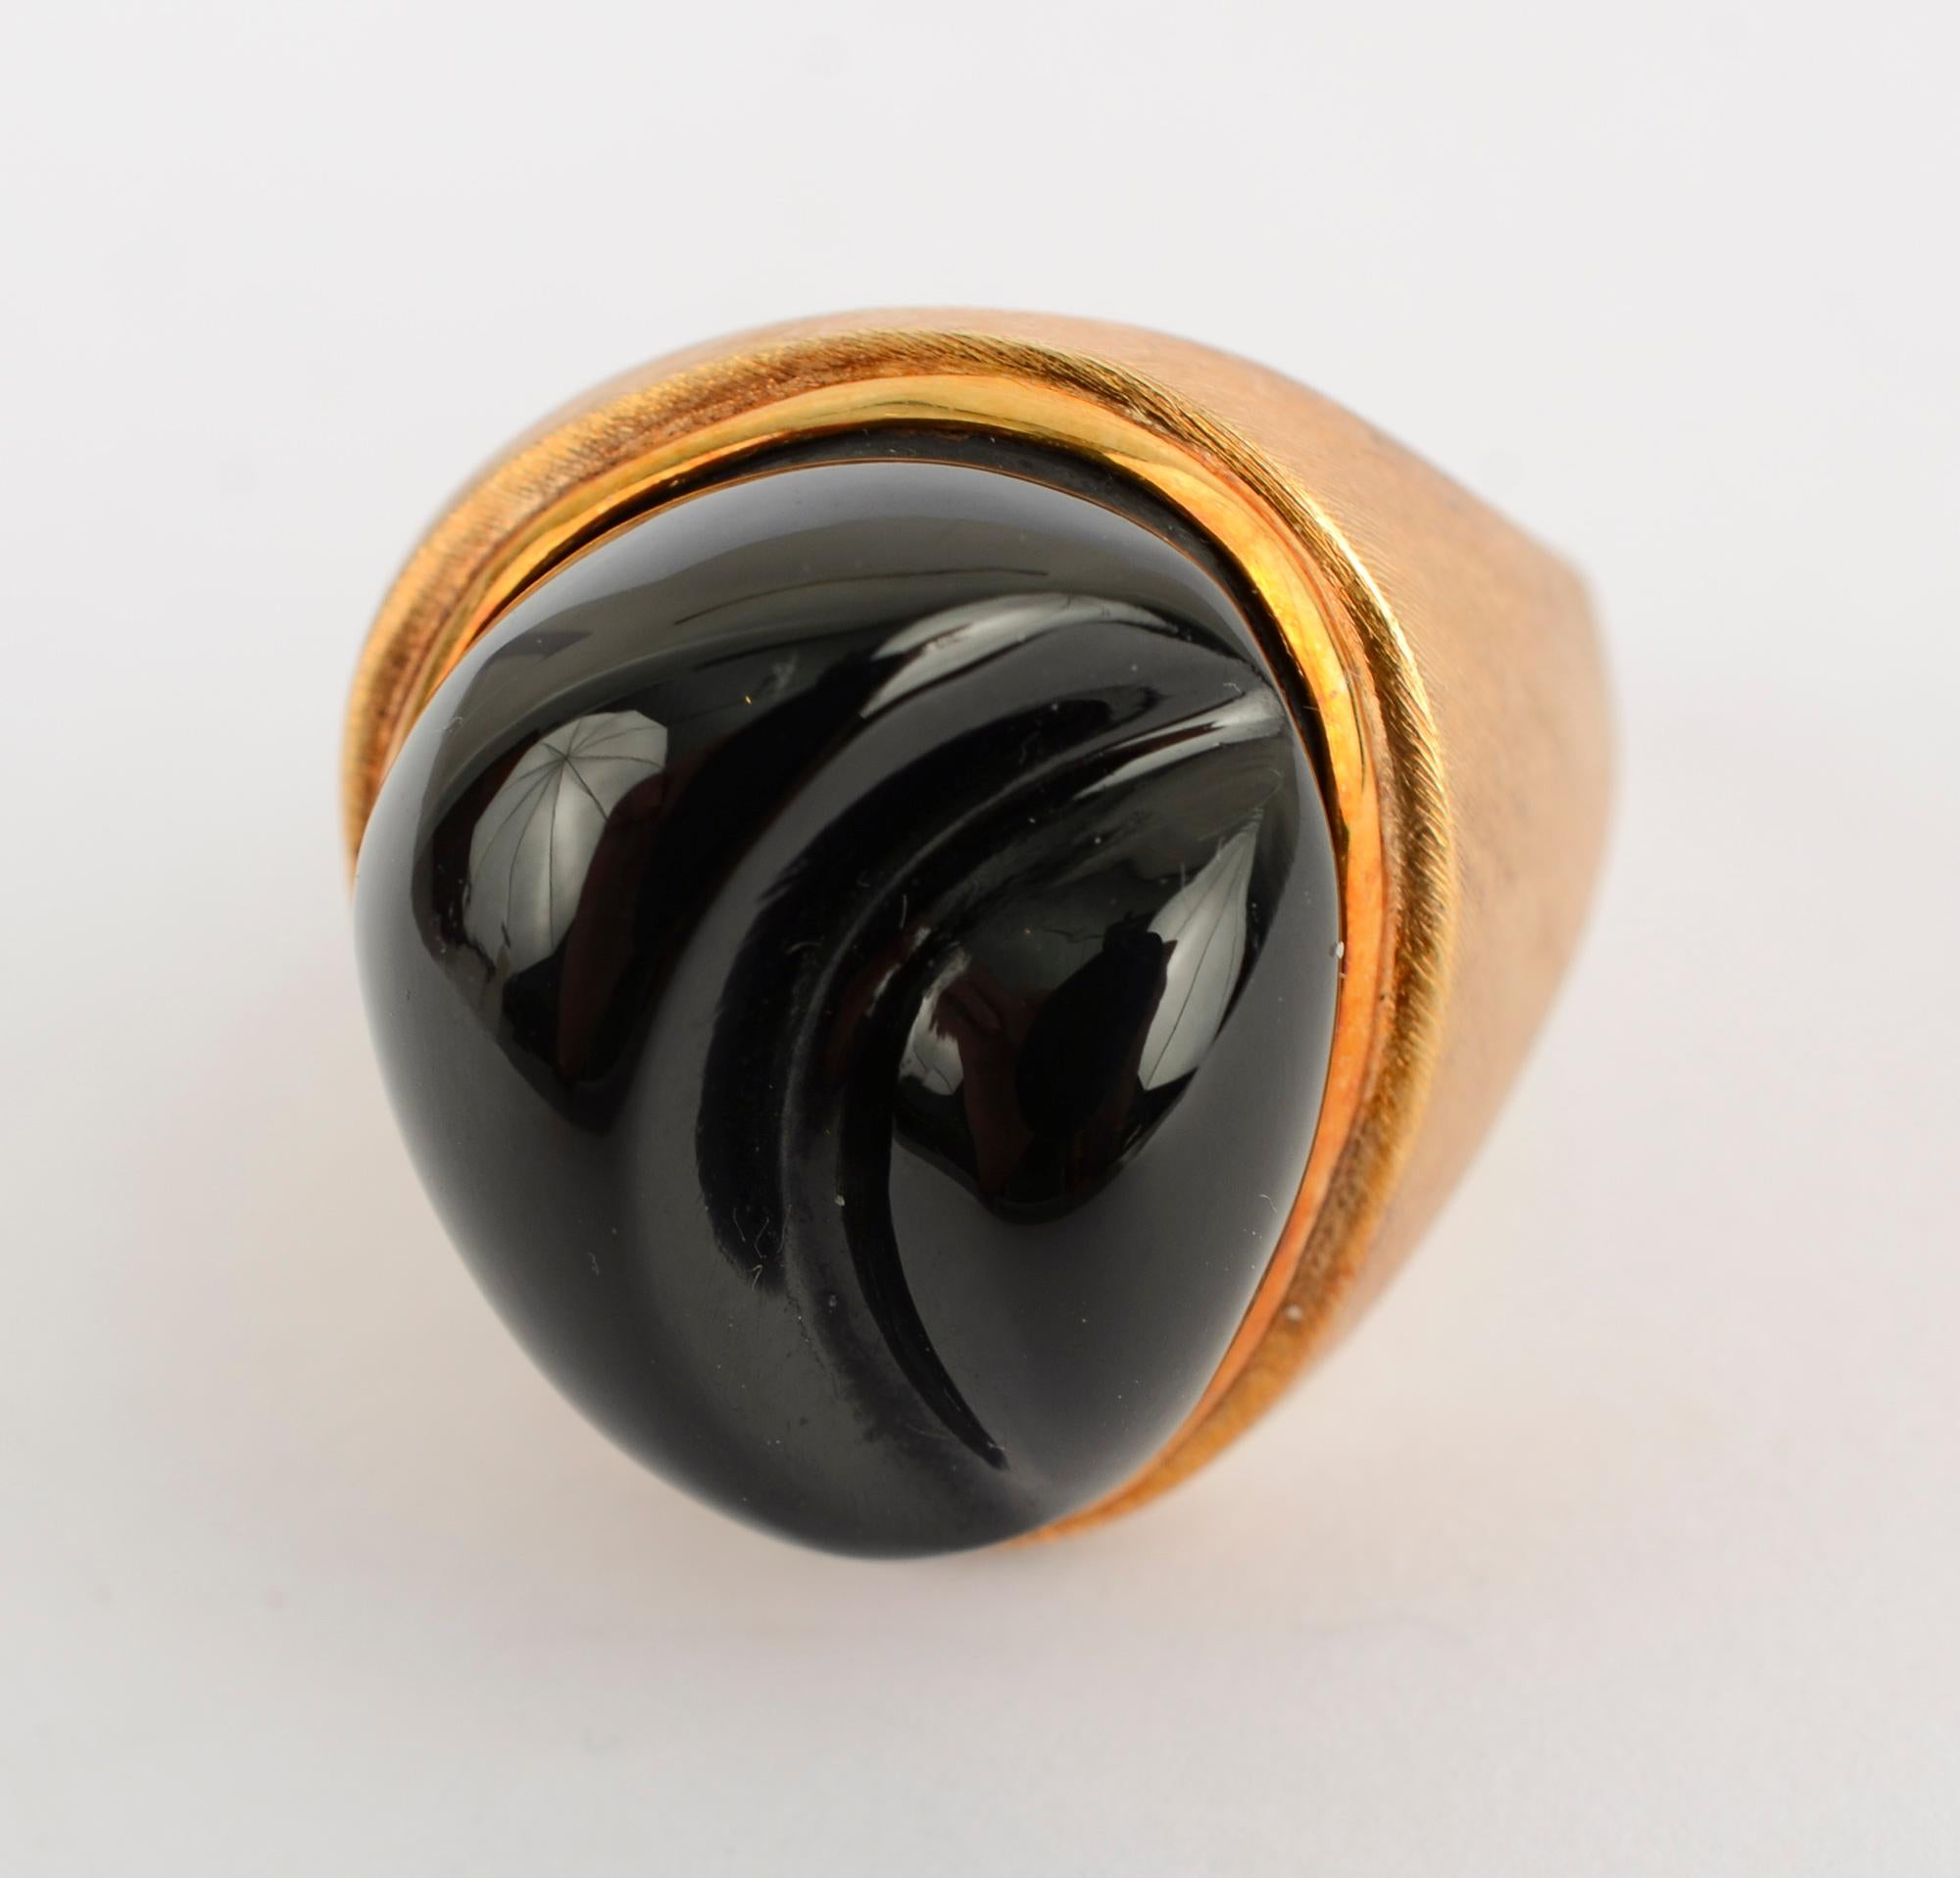 This ring was made by  Bruno Guidi, head designer and chief goldsmith for the acclaimed Brazilian jeweler Haroldo Burle Marx. They worked together for more than 30 years.  The forma livre black tourmaline stone is typical of their work.
The gold has